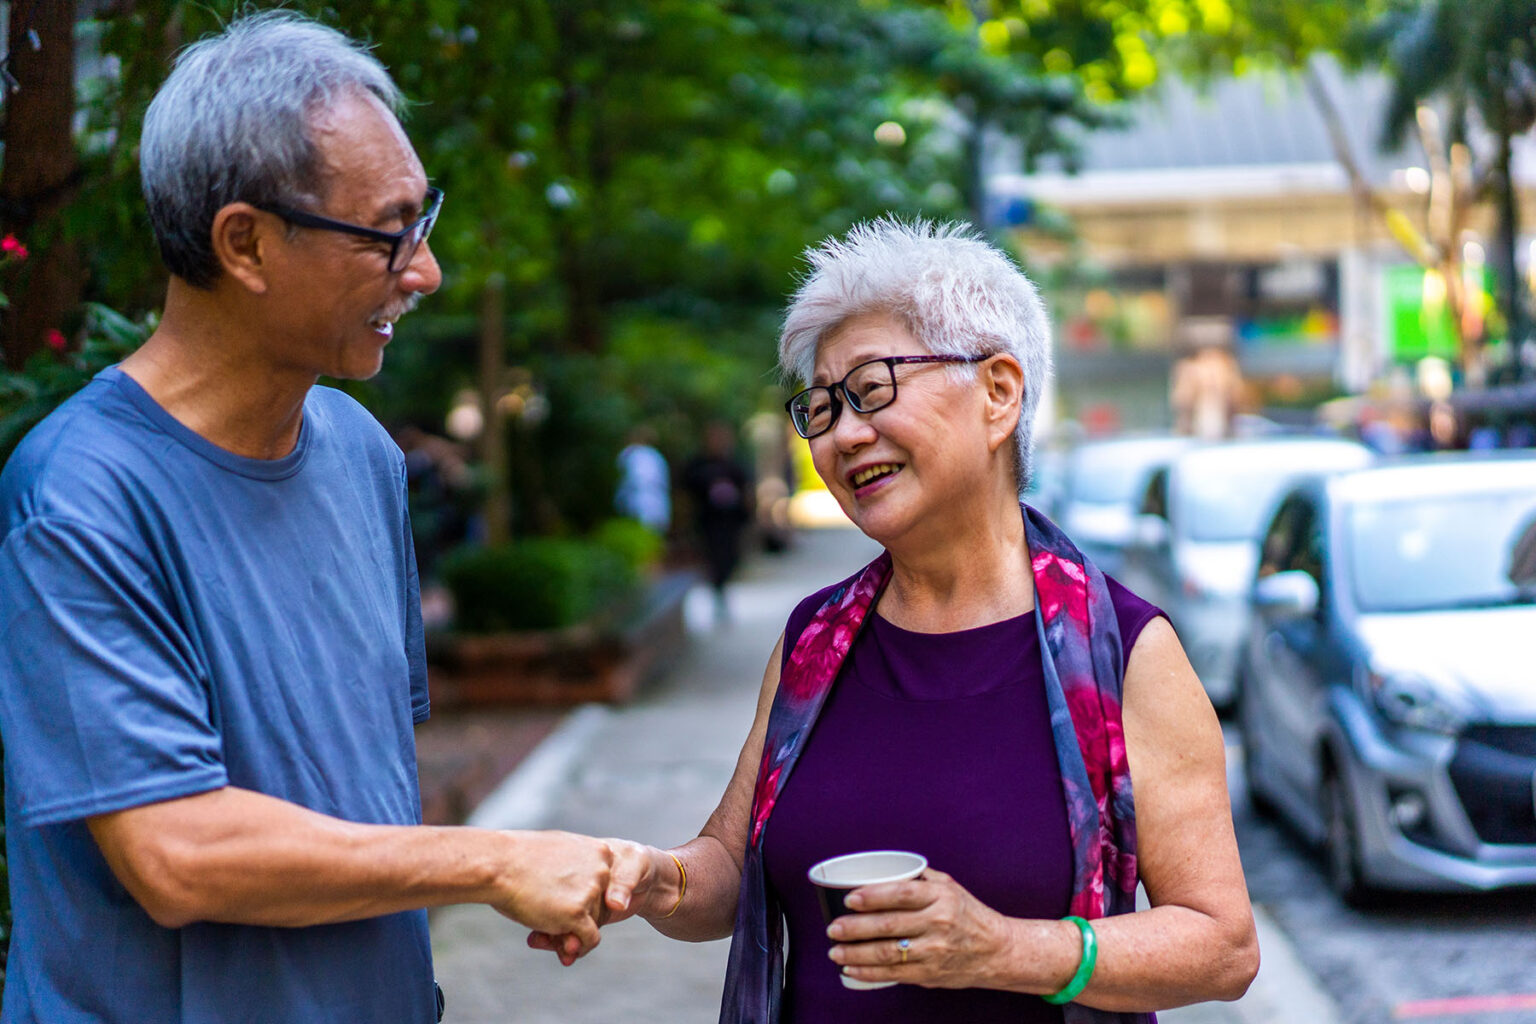 Two senior people shaking hands and talking while they are standing on the street in Singapore.